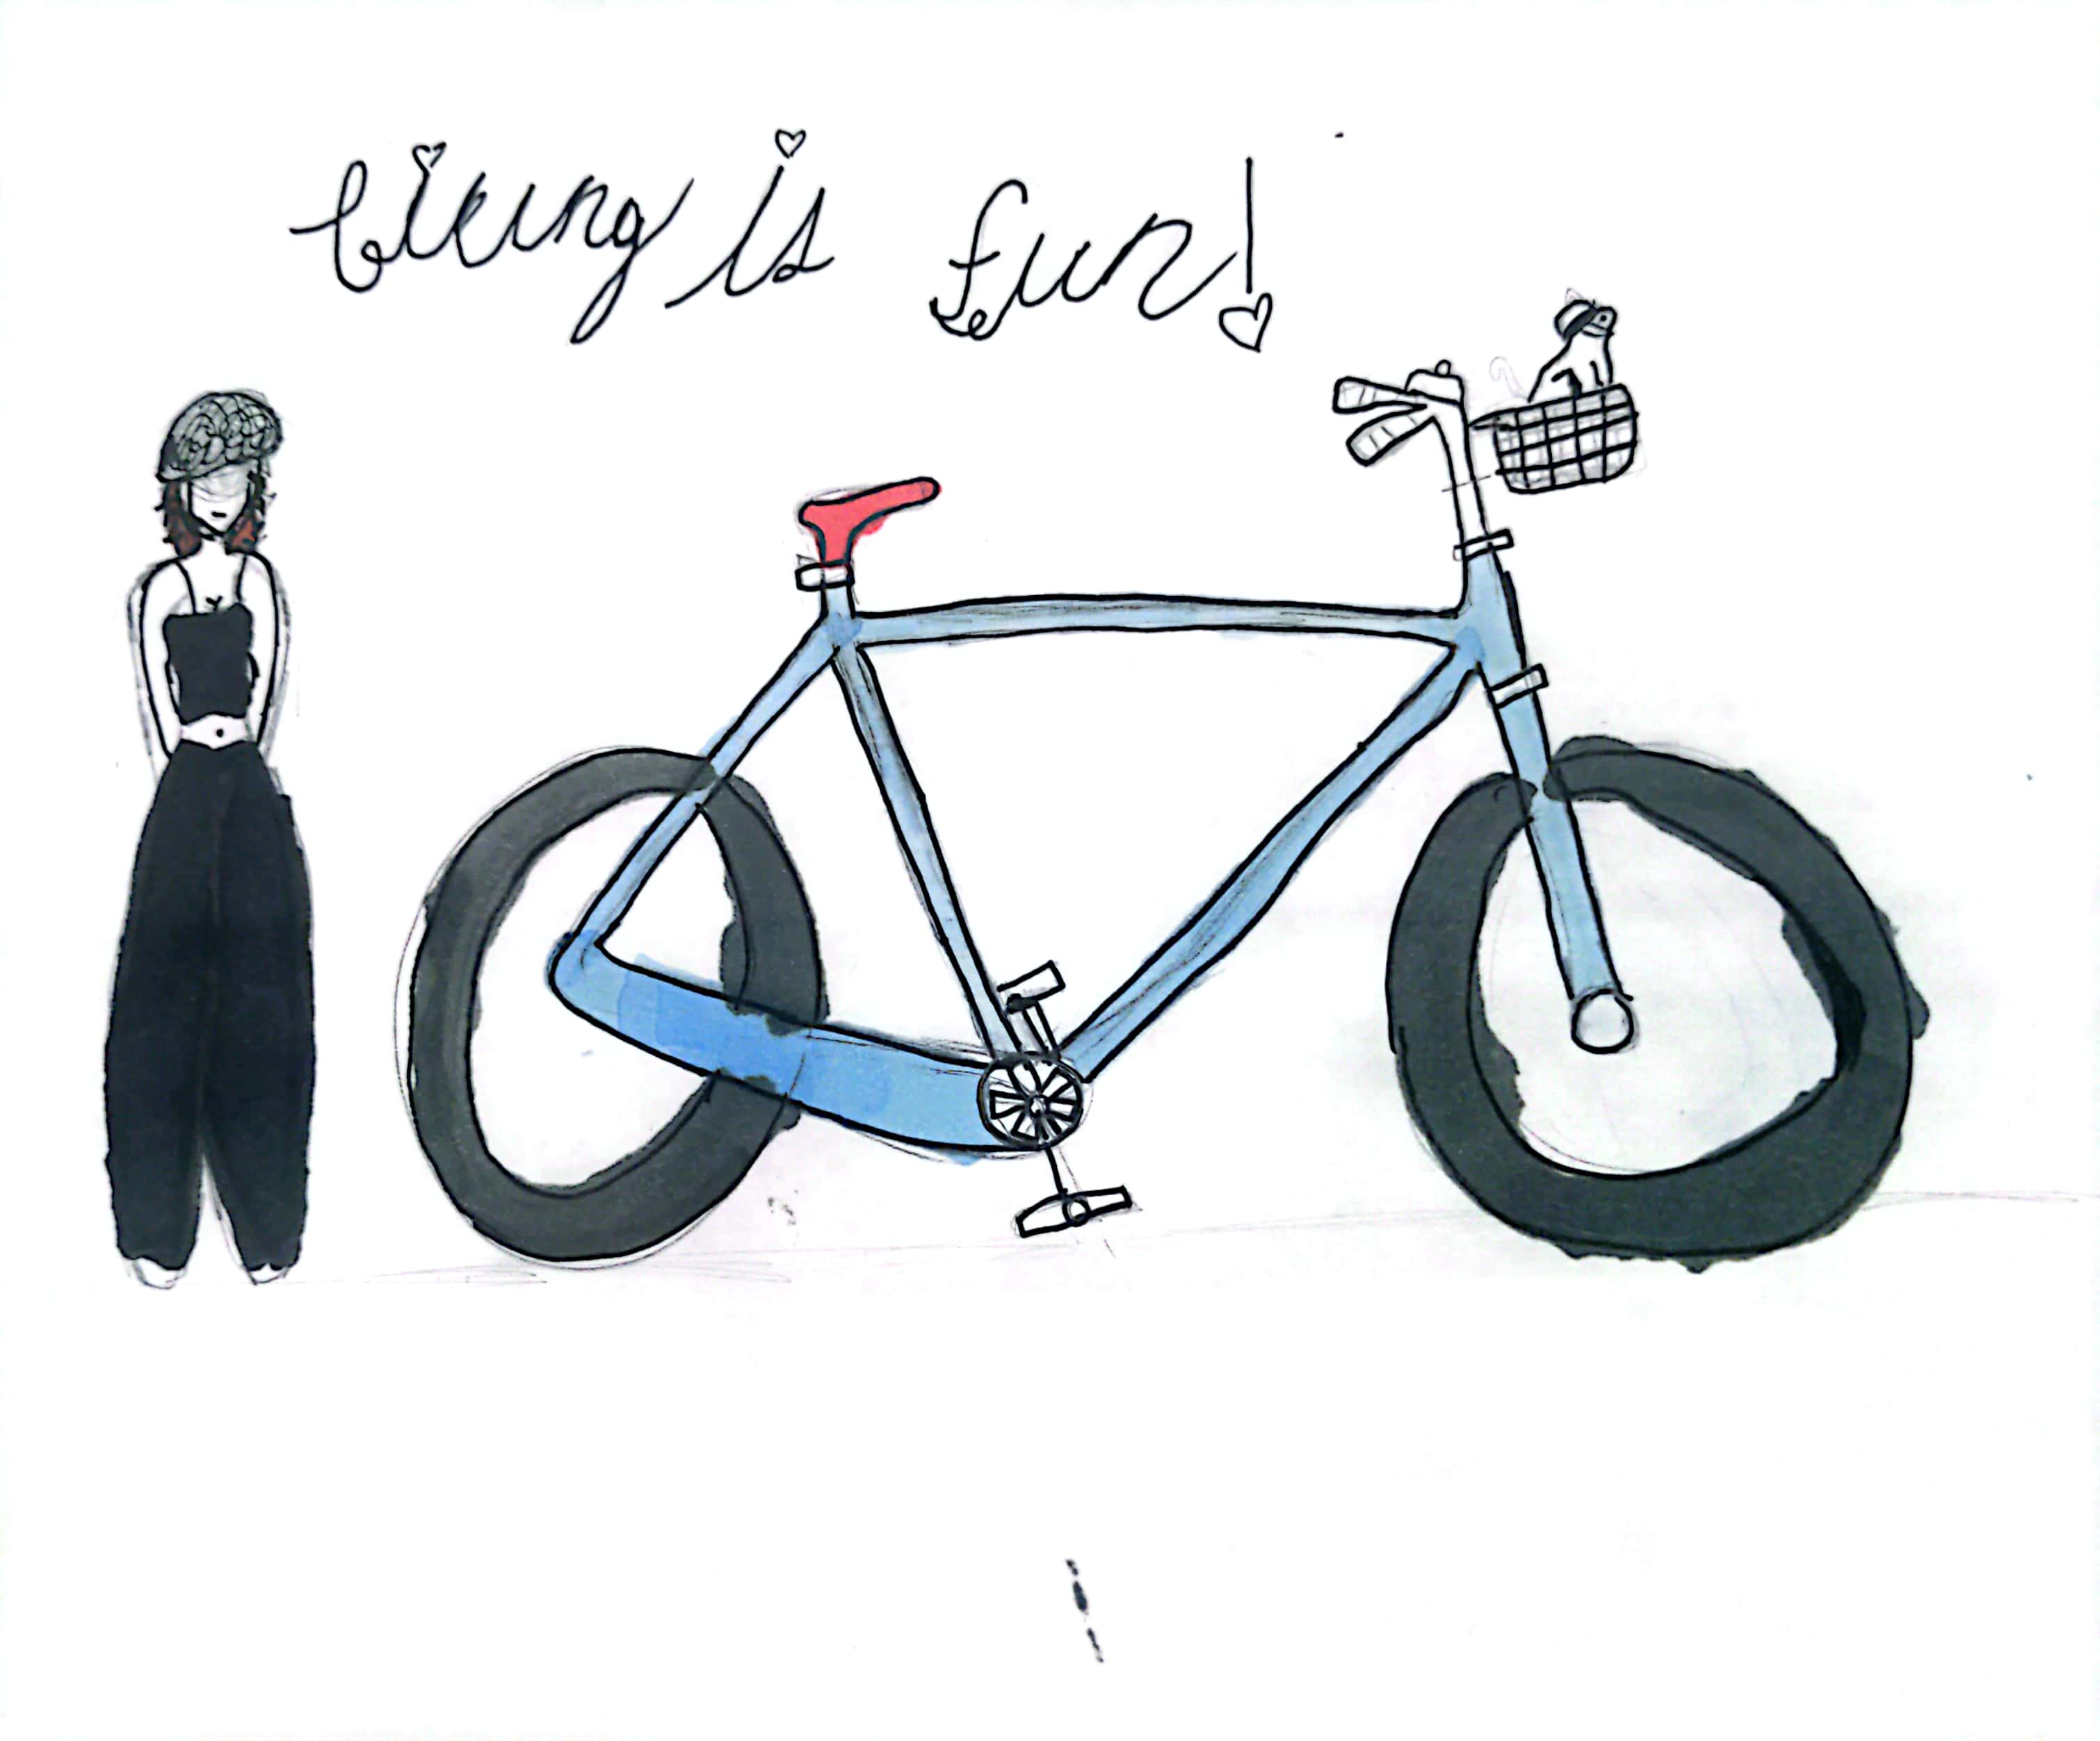 Student artwork featuring a blue bike with a puppy wearing helmet in the bike basket. A girl wearing helmet black tank top and baggy pants is standing next to the bike. Title 